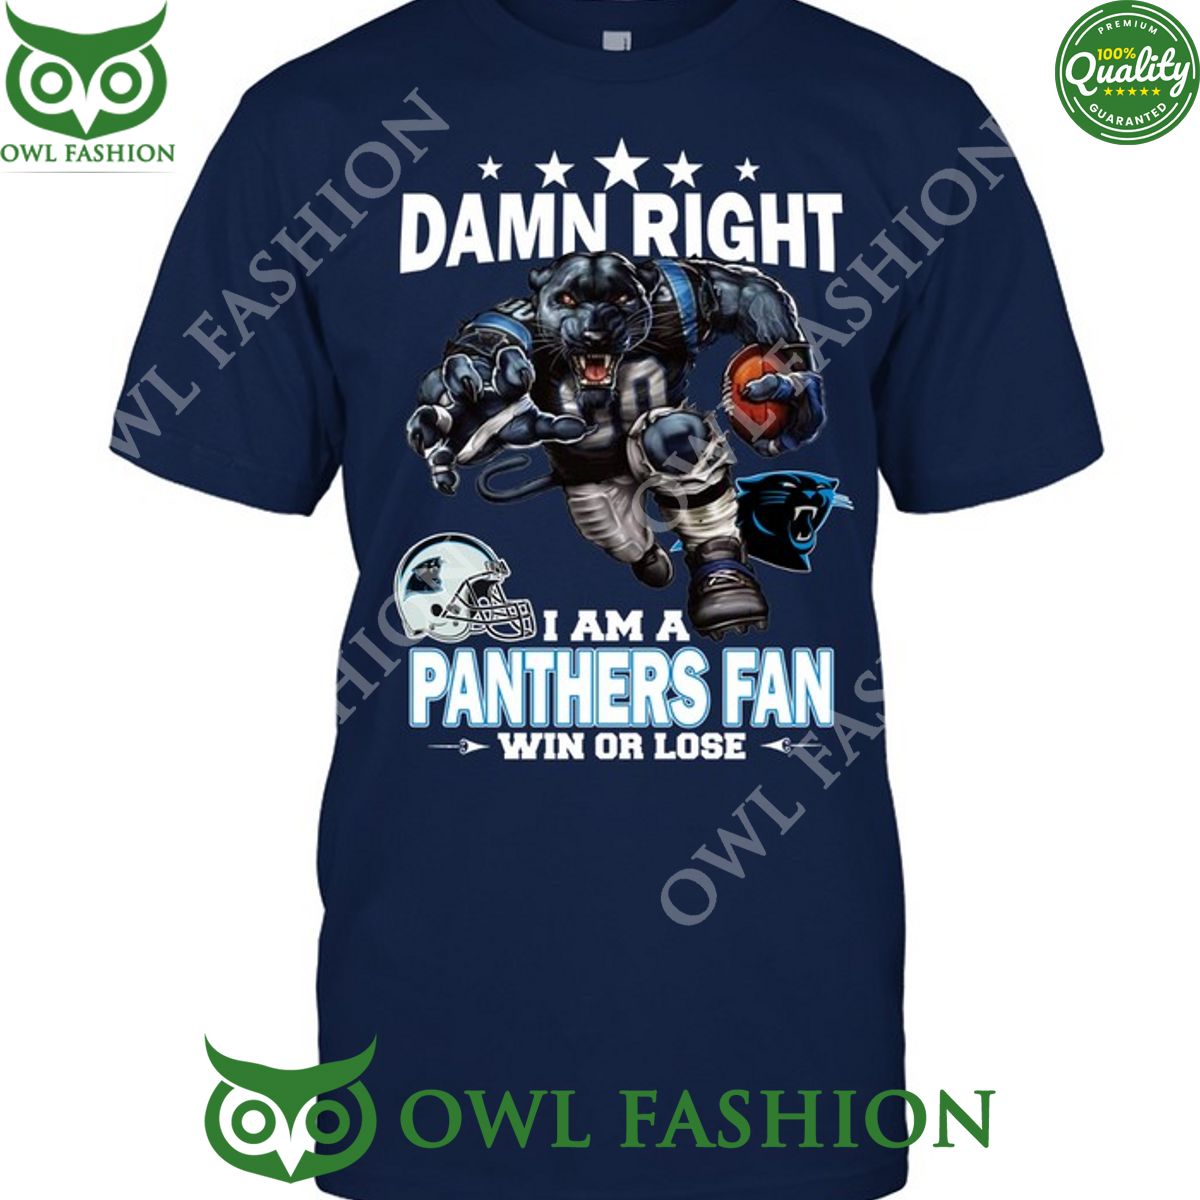 Damn Right Carolina Panthers NFL Fan Win or lose t shirt Ah! It is marvellous